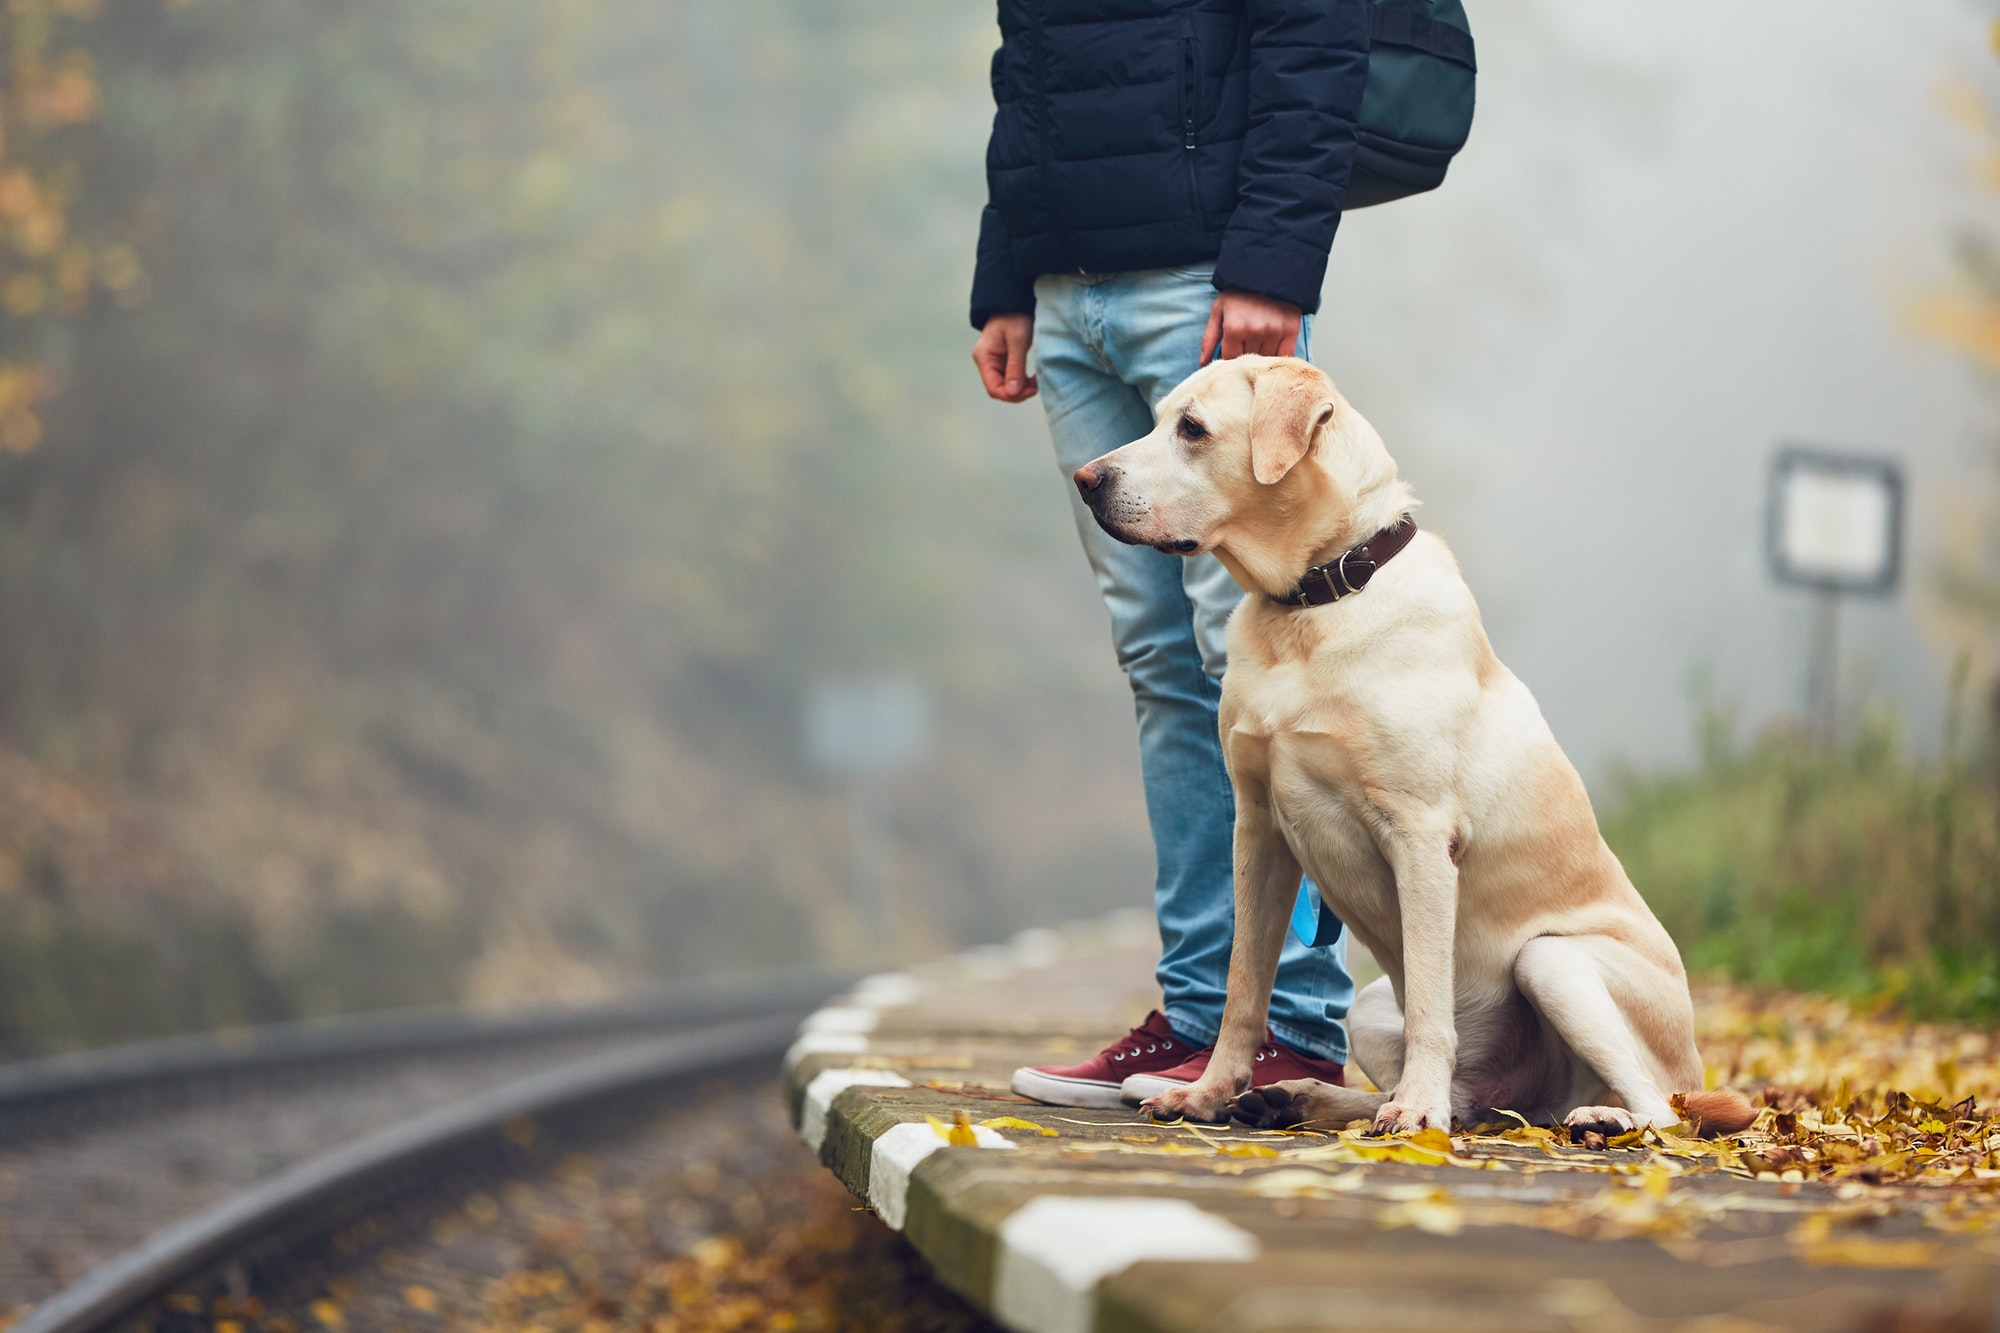 Man traveling with his dog by train